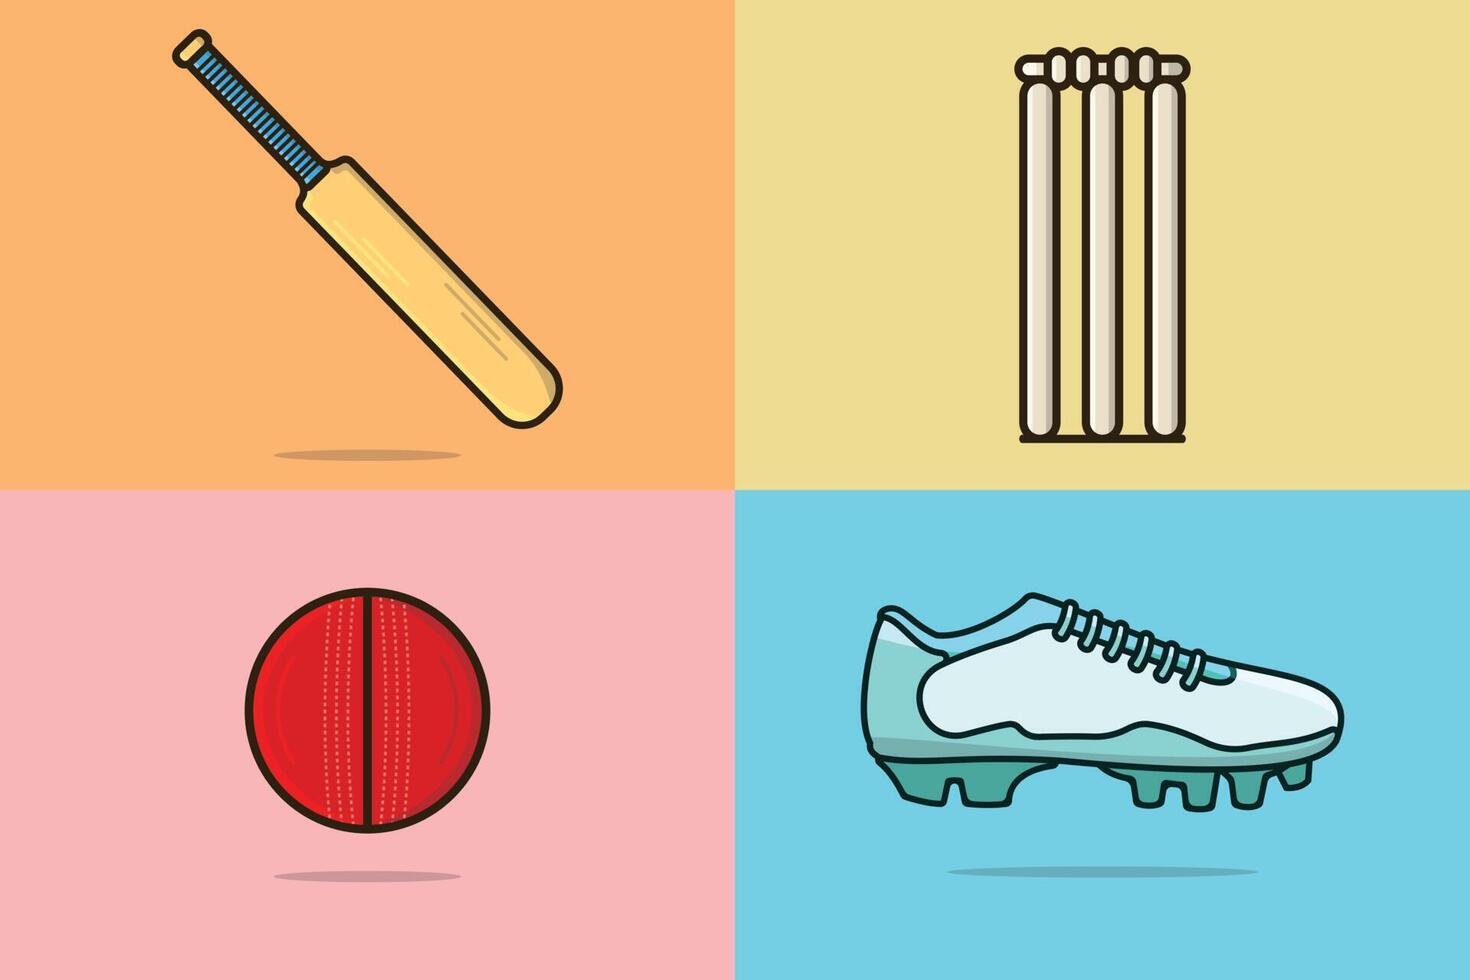 Set of Cricket sports game elements vector illustration. Sports objects icon concept. Wicket, Cricket Ball, Shoe, and Cricket Bat collection vector design. Colorful sport equipment icon illustration.